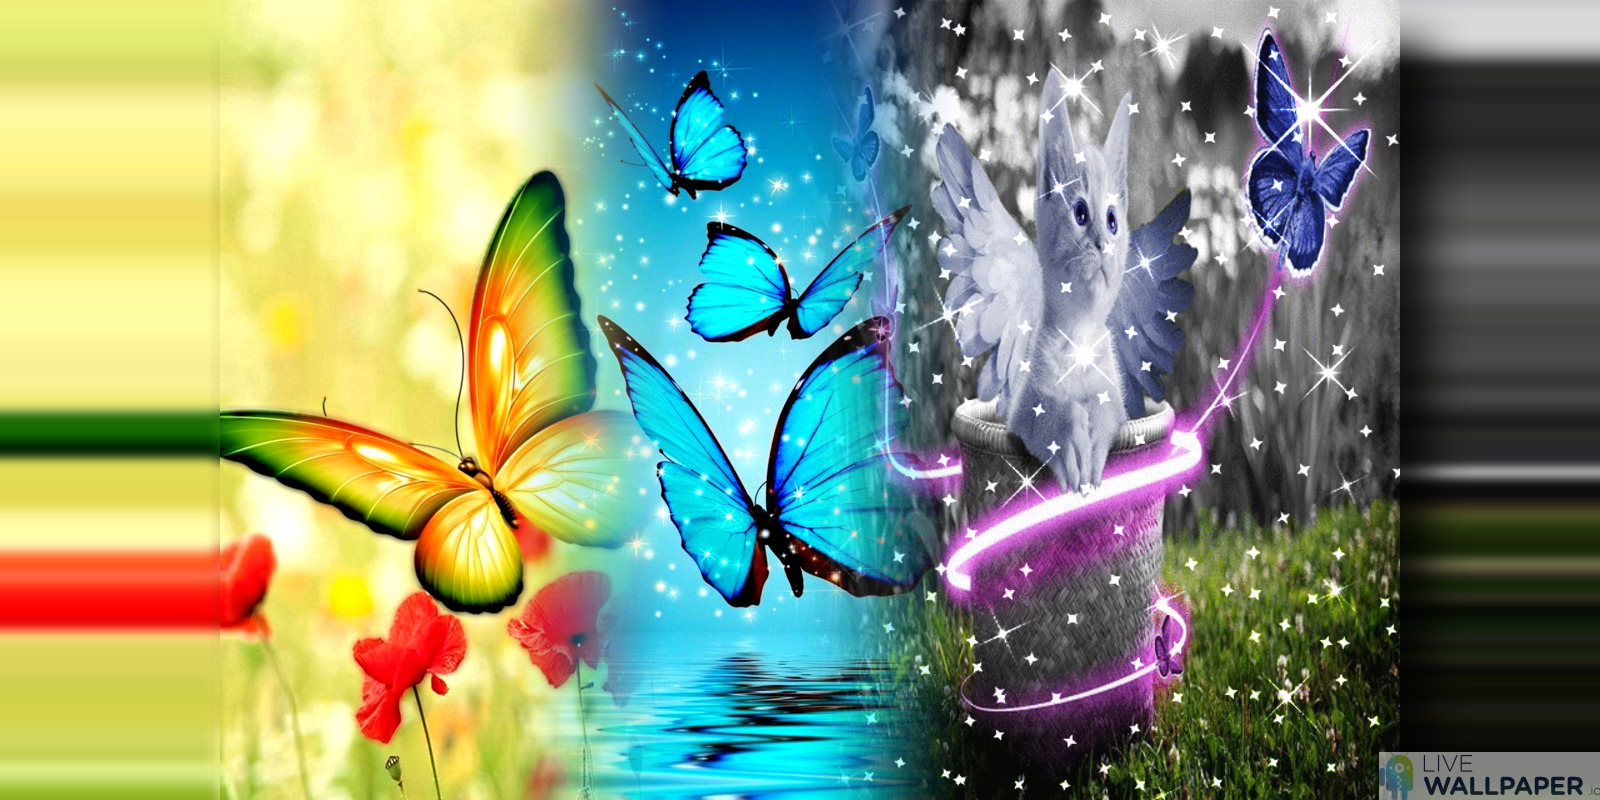 butterfly live wallpaper,butterfly,nature,graphic design,moths and butterflies,insect